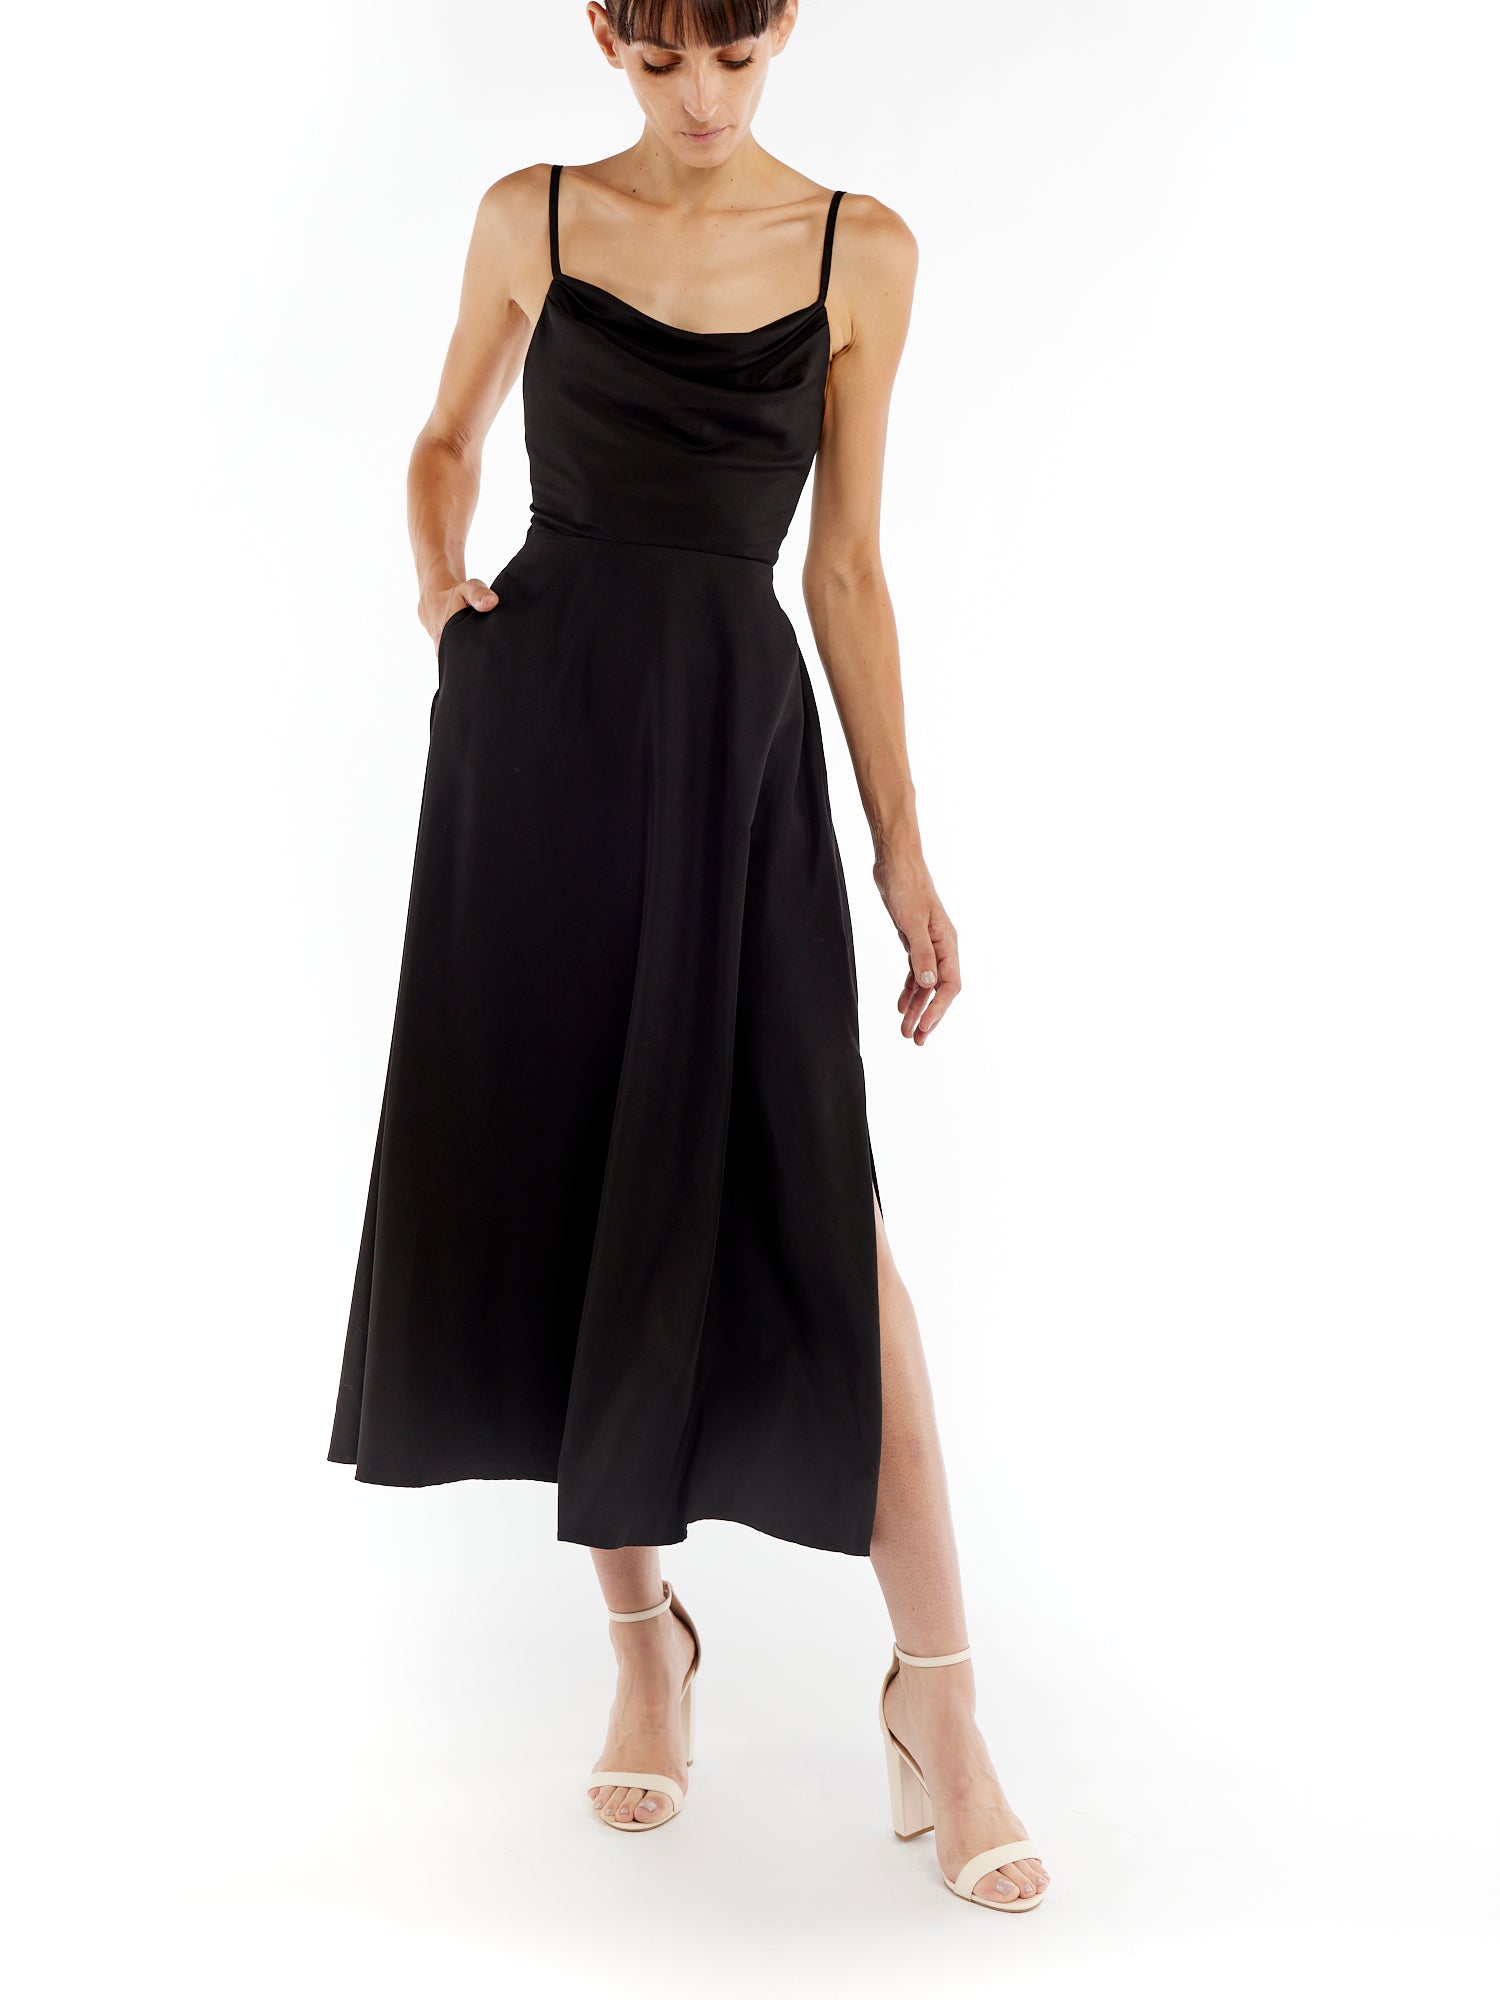 cowl neck dress with adjustable straps, side pockets, ankle length and open tie back in black